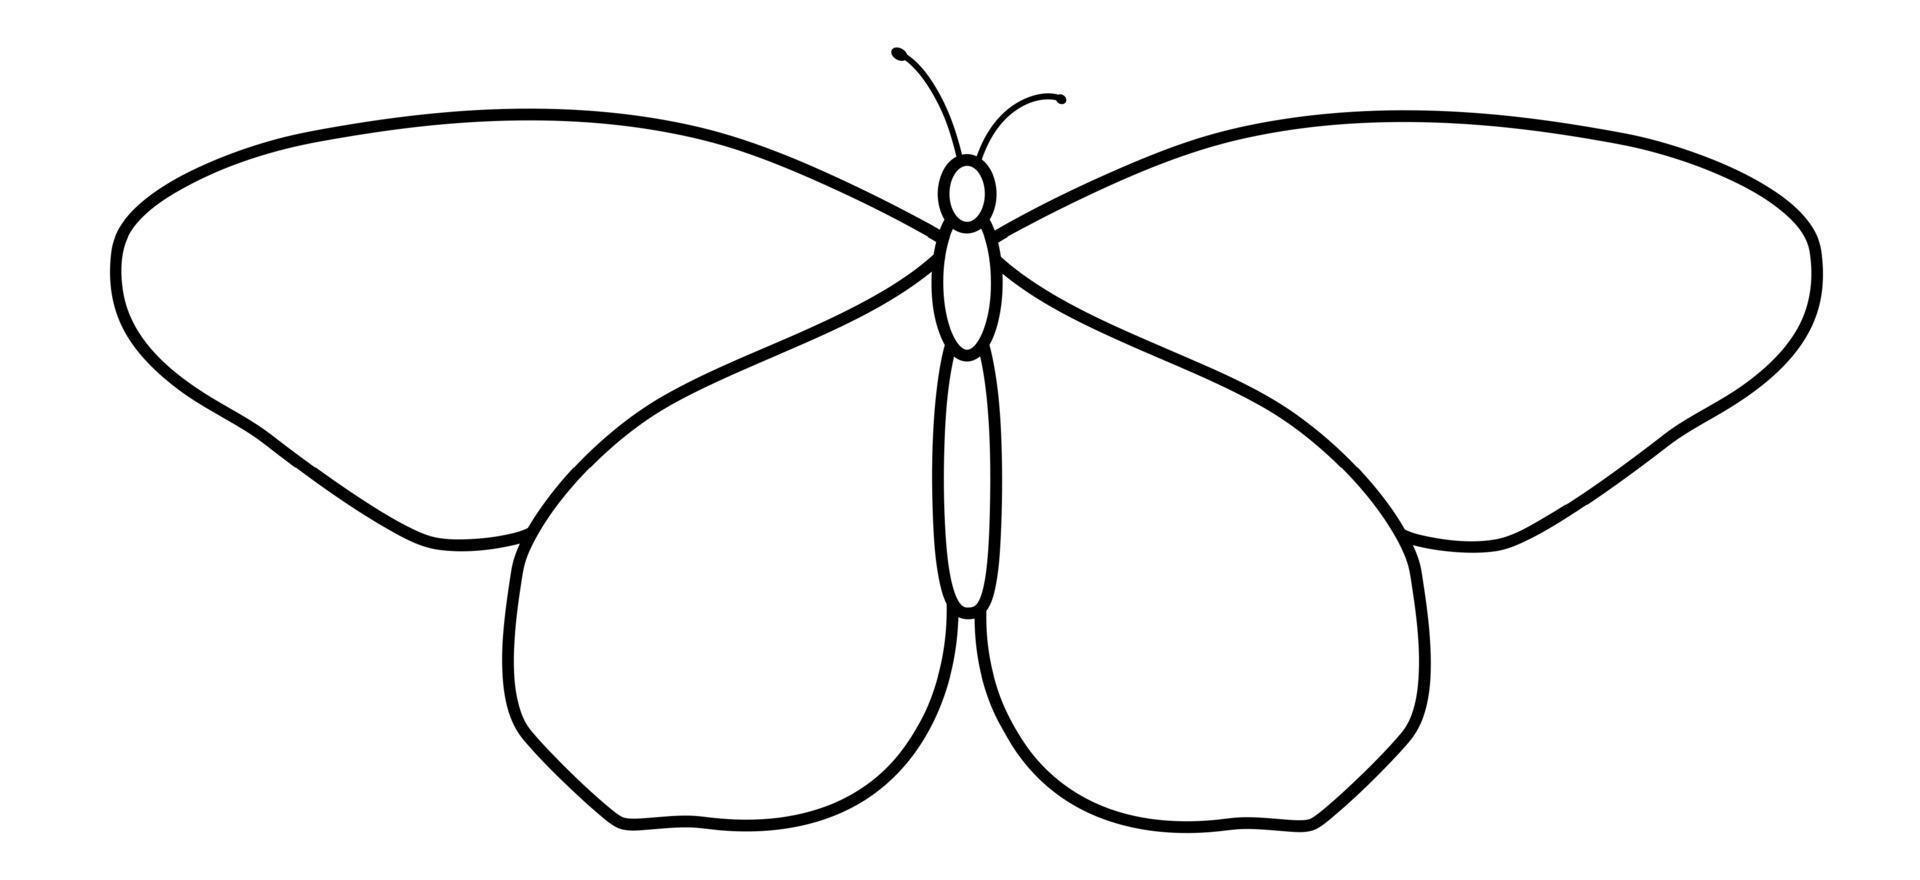 Butterfly black and white outline illustration. Coloring book or ...